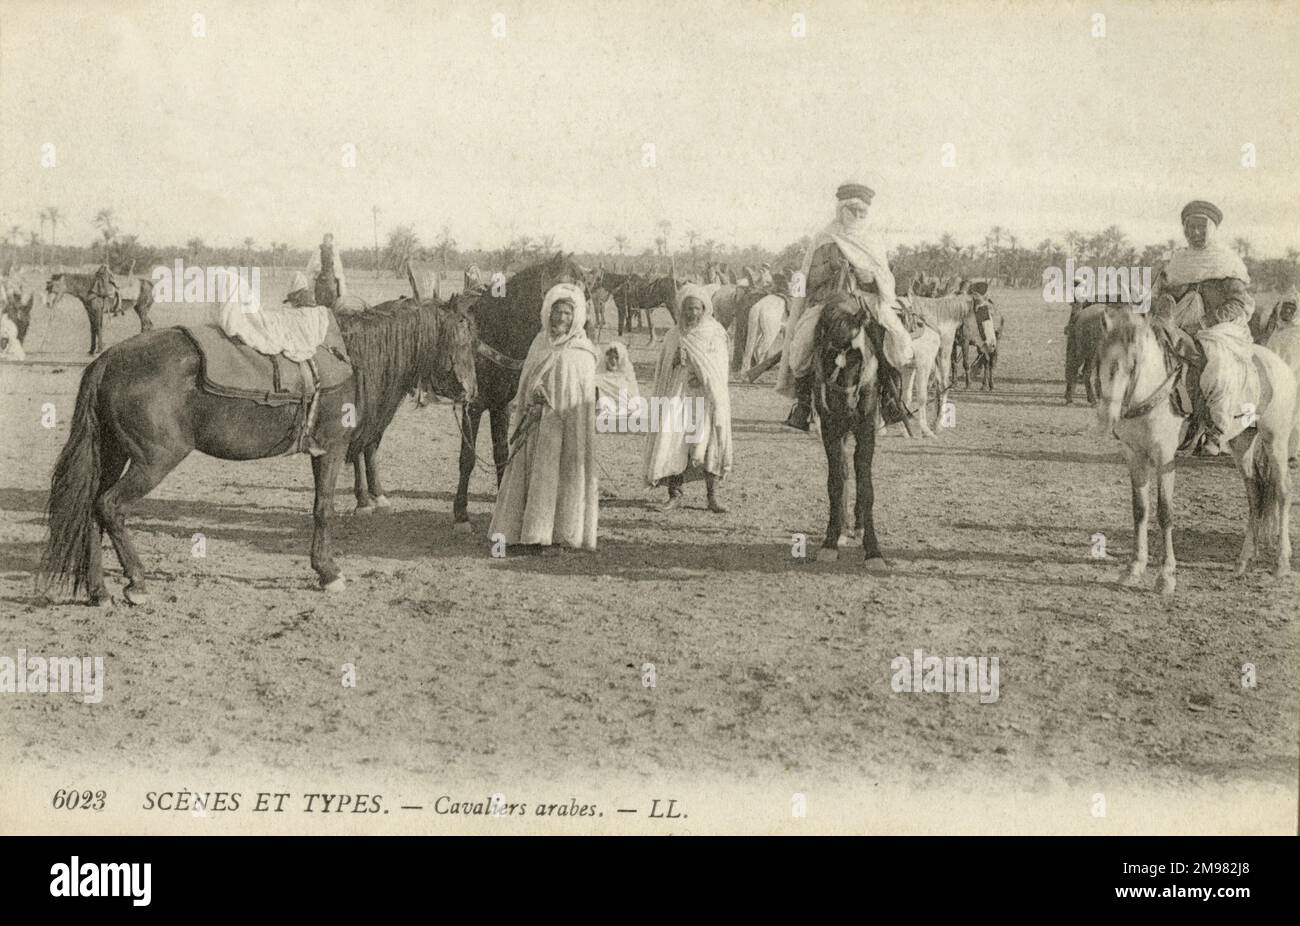 A large group of Arab horsemen gather, somewhere in North Africa. Some are mounted on their horses, others are holding them by their bridles. Stock Photo